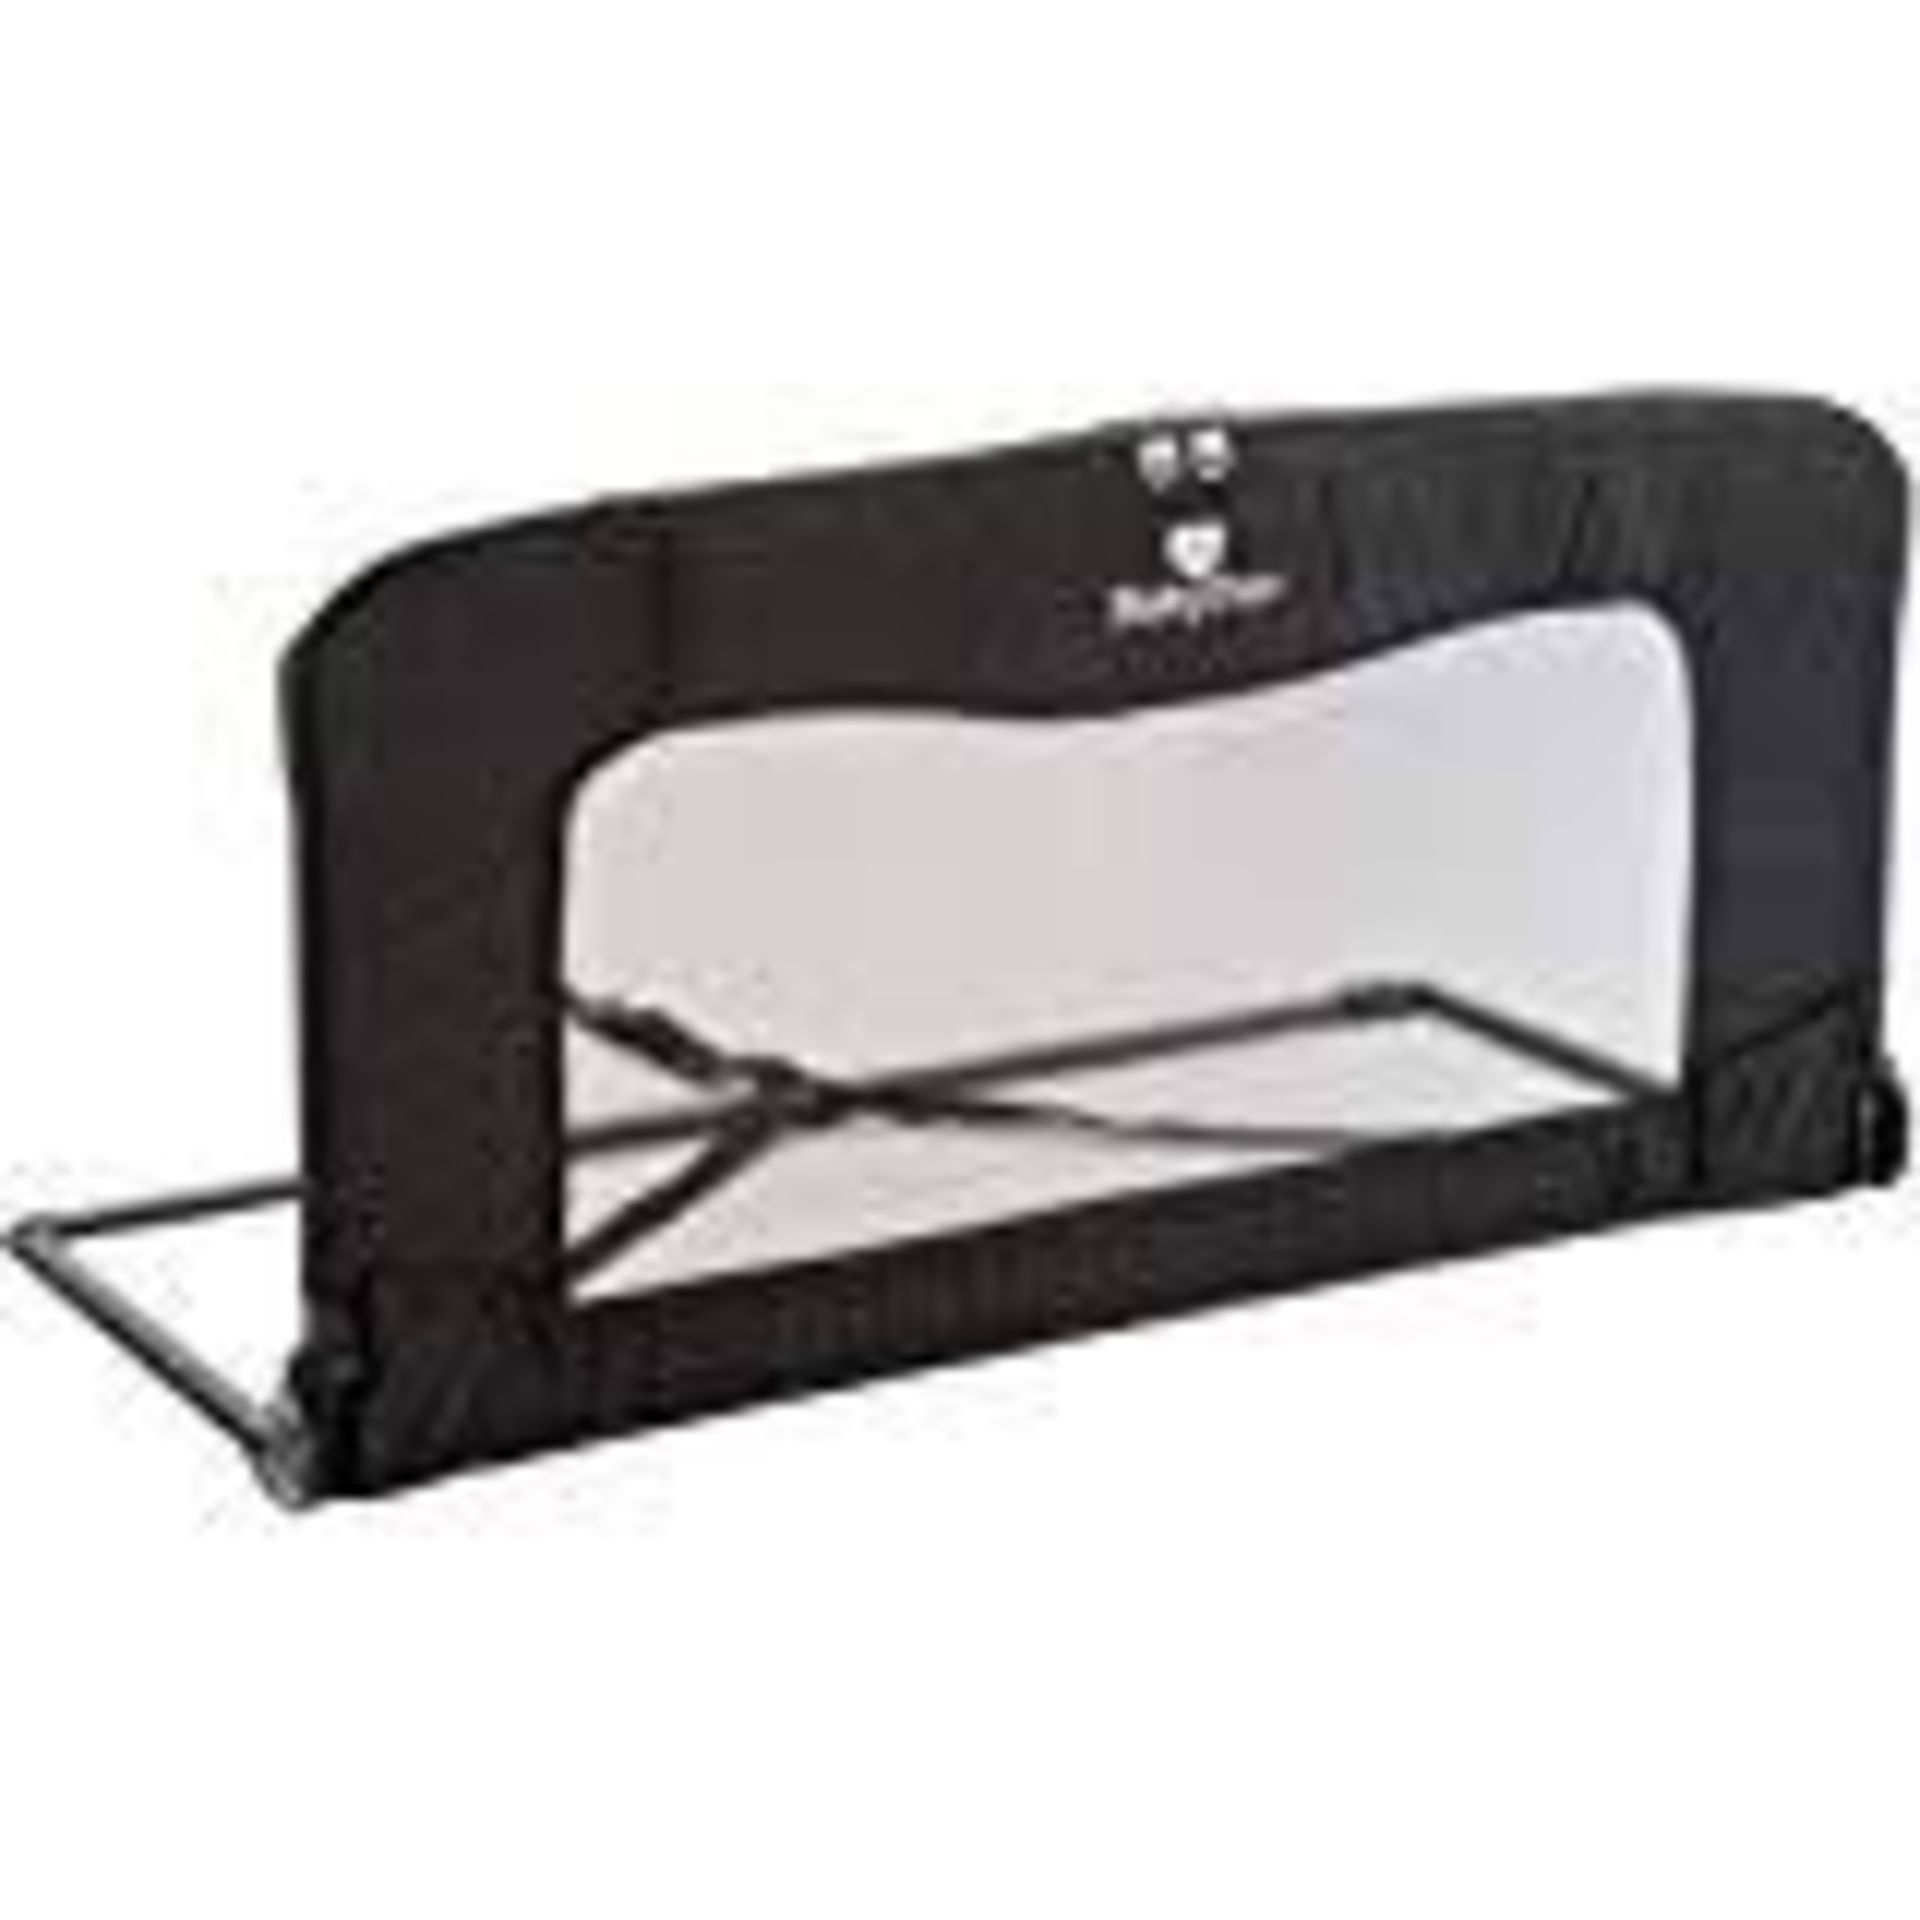 Boxed Baby Dan Sleep & Safe Universal Bed Guard RRP £35 (BUN546067) (PICTURES ARE FOR ILLUSTRATION